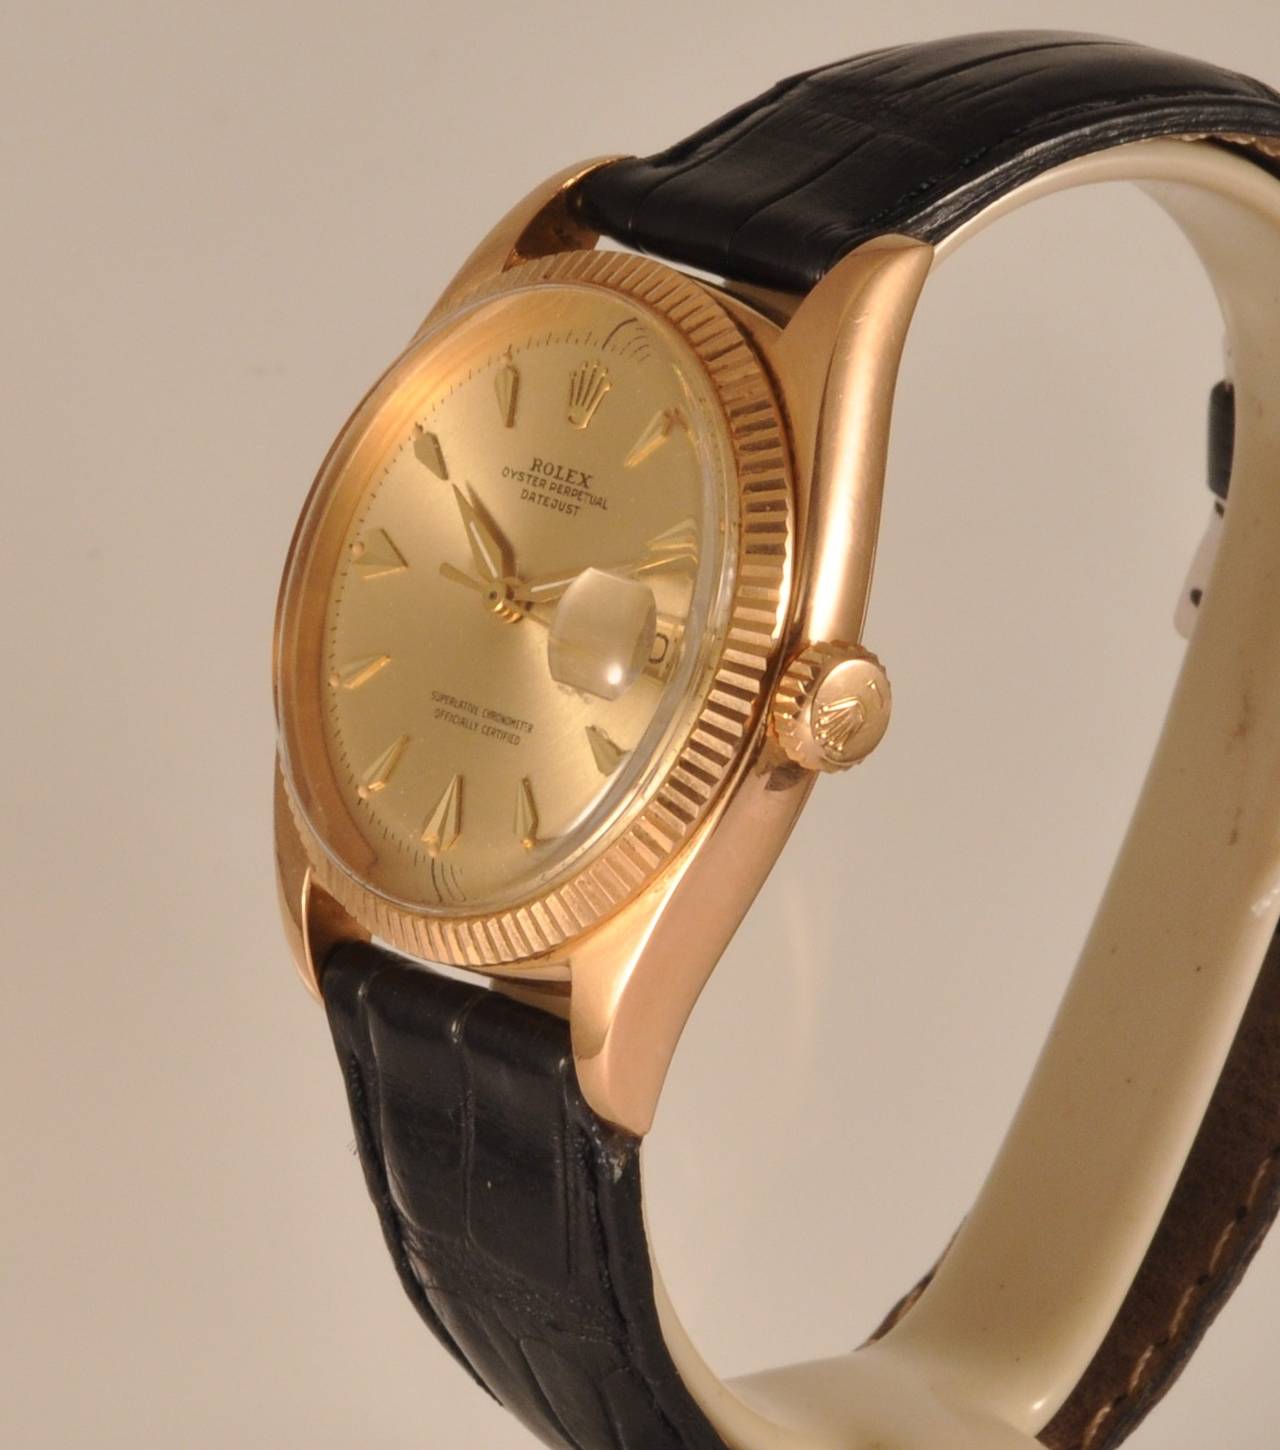 Rolex 18k Rose Gold Datejust wristwatch, self-winding with date.